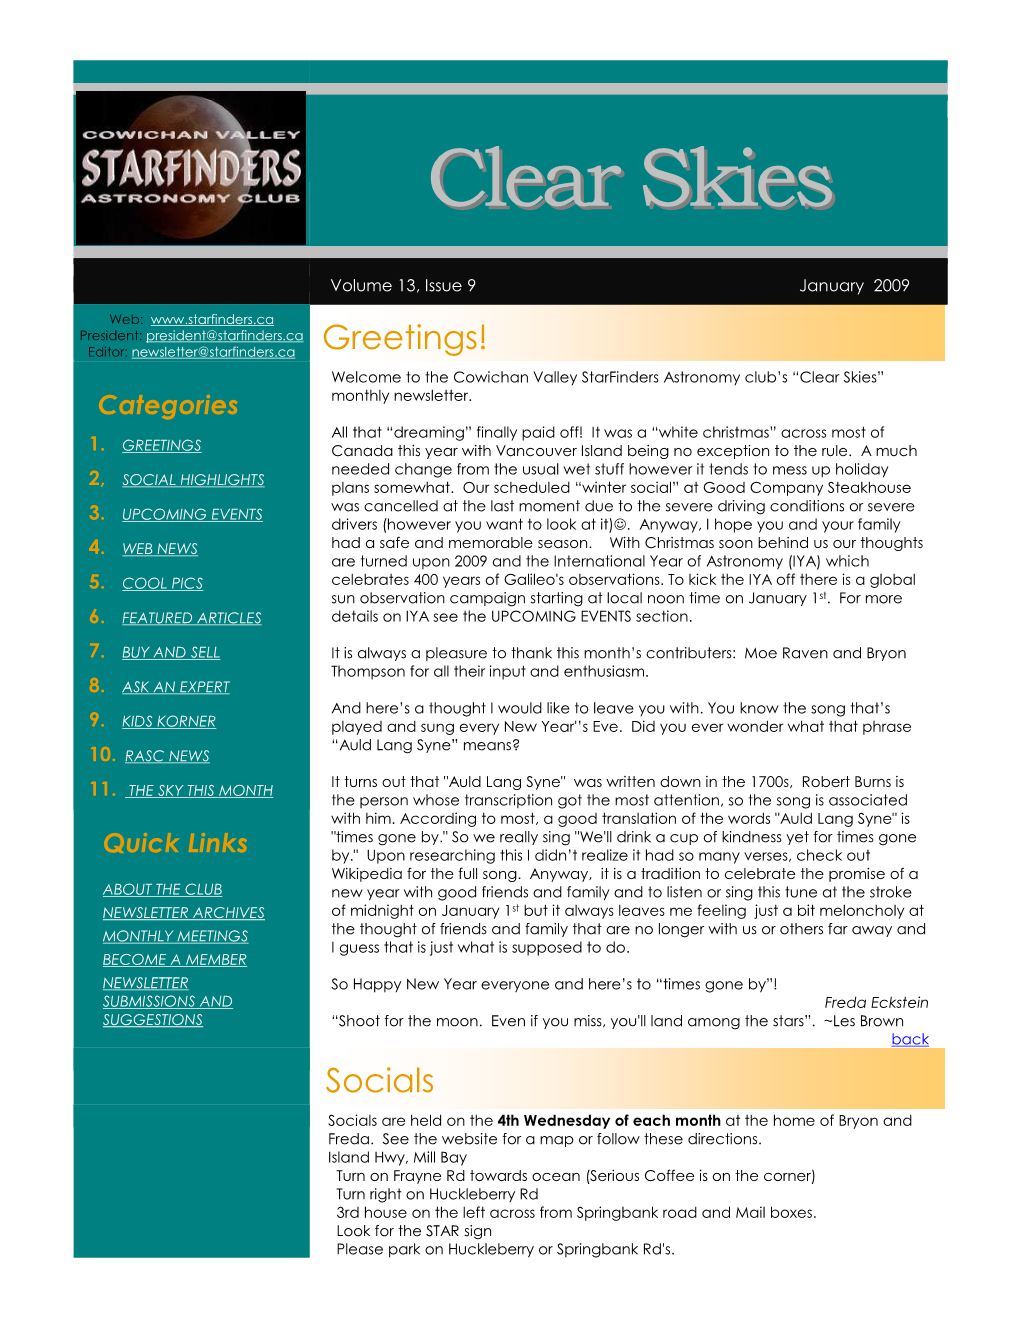 Clear Skies” Monthly Newsletter